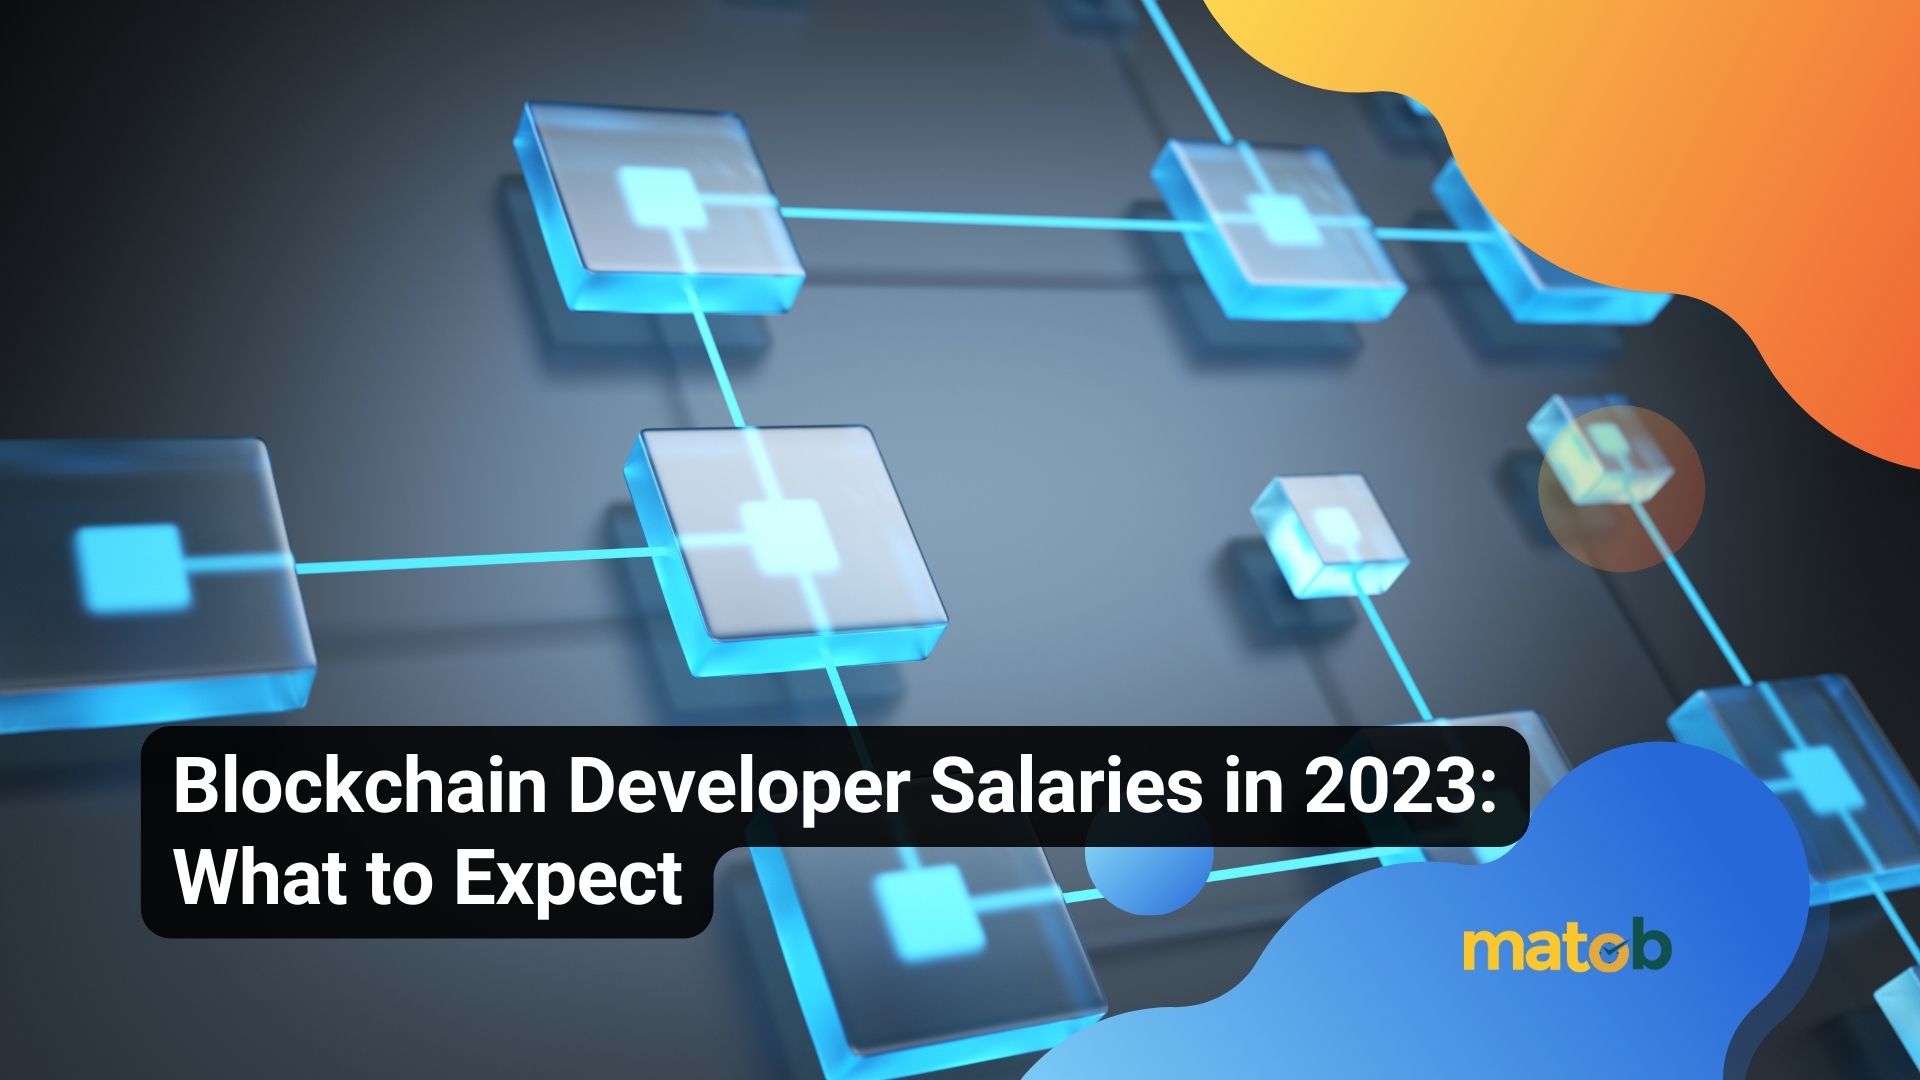 Blockchain Developer Salaries in 2023: What to Expect